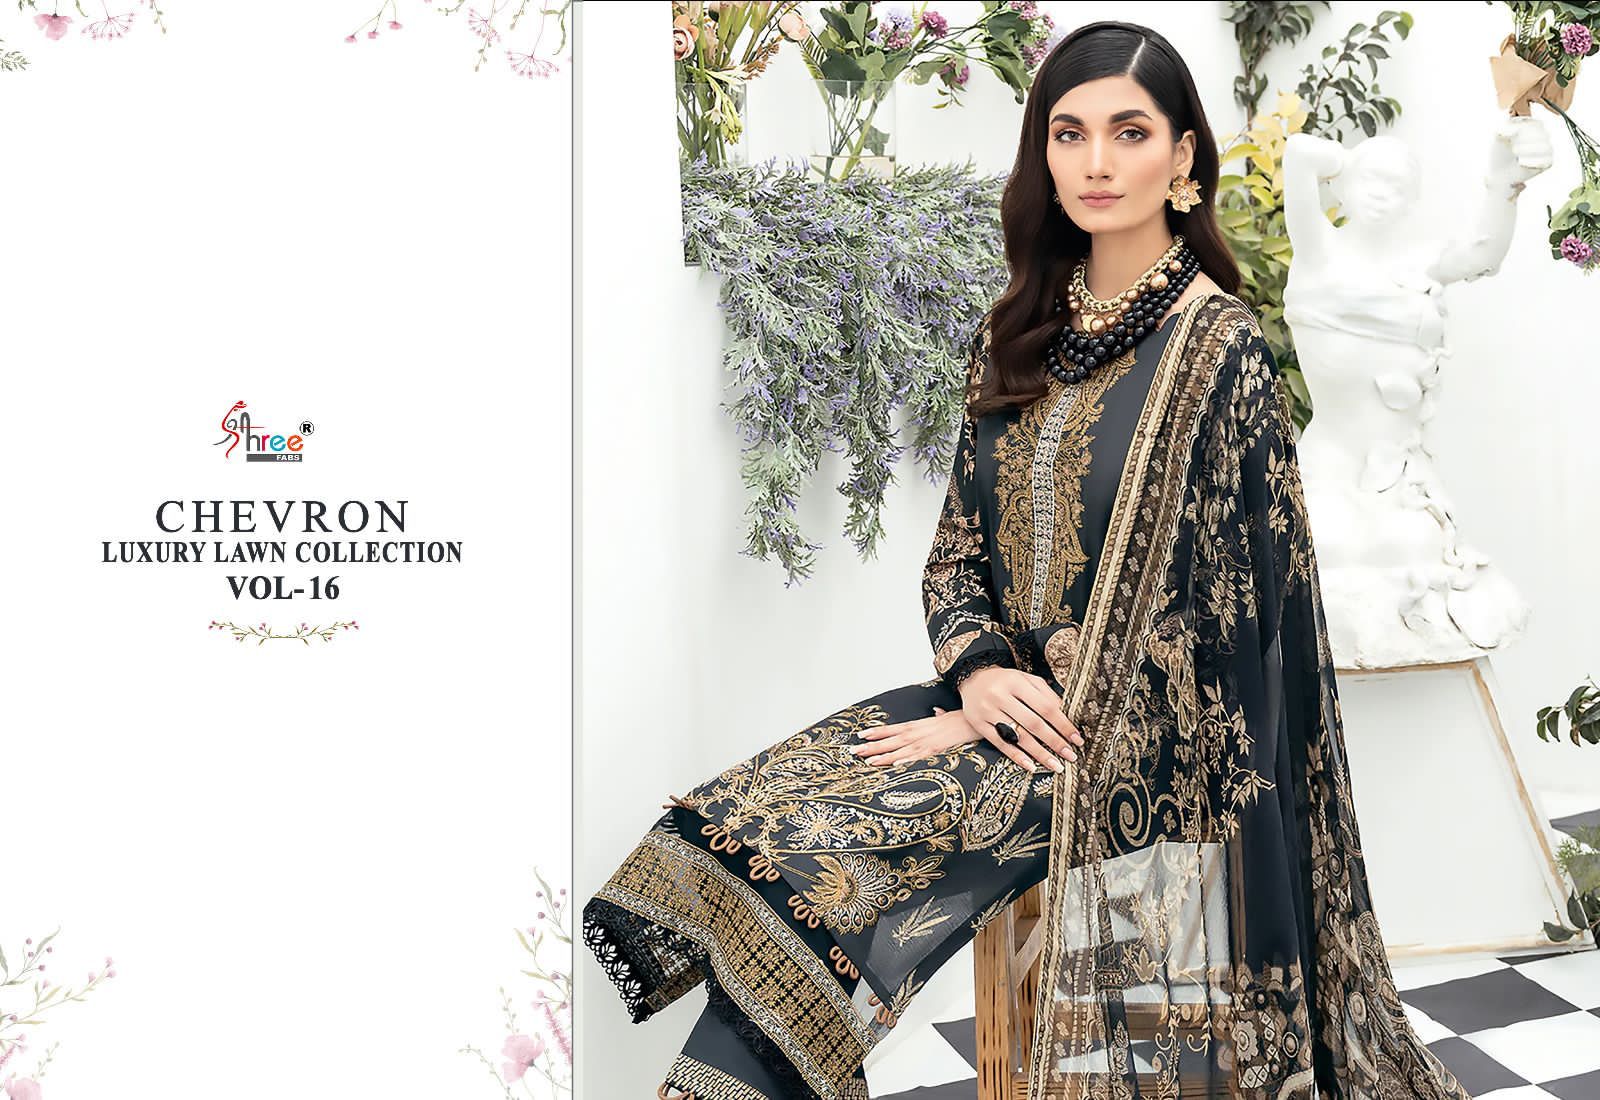 Shree Chevron Luxury Lawn Collection Vol 16 collection 1